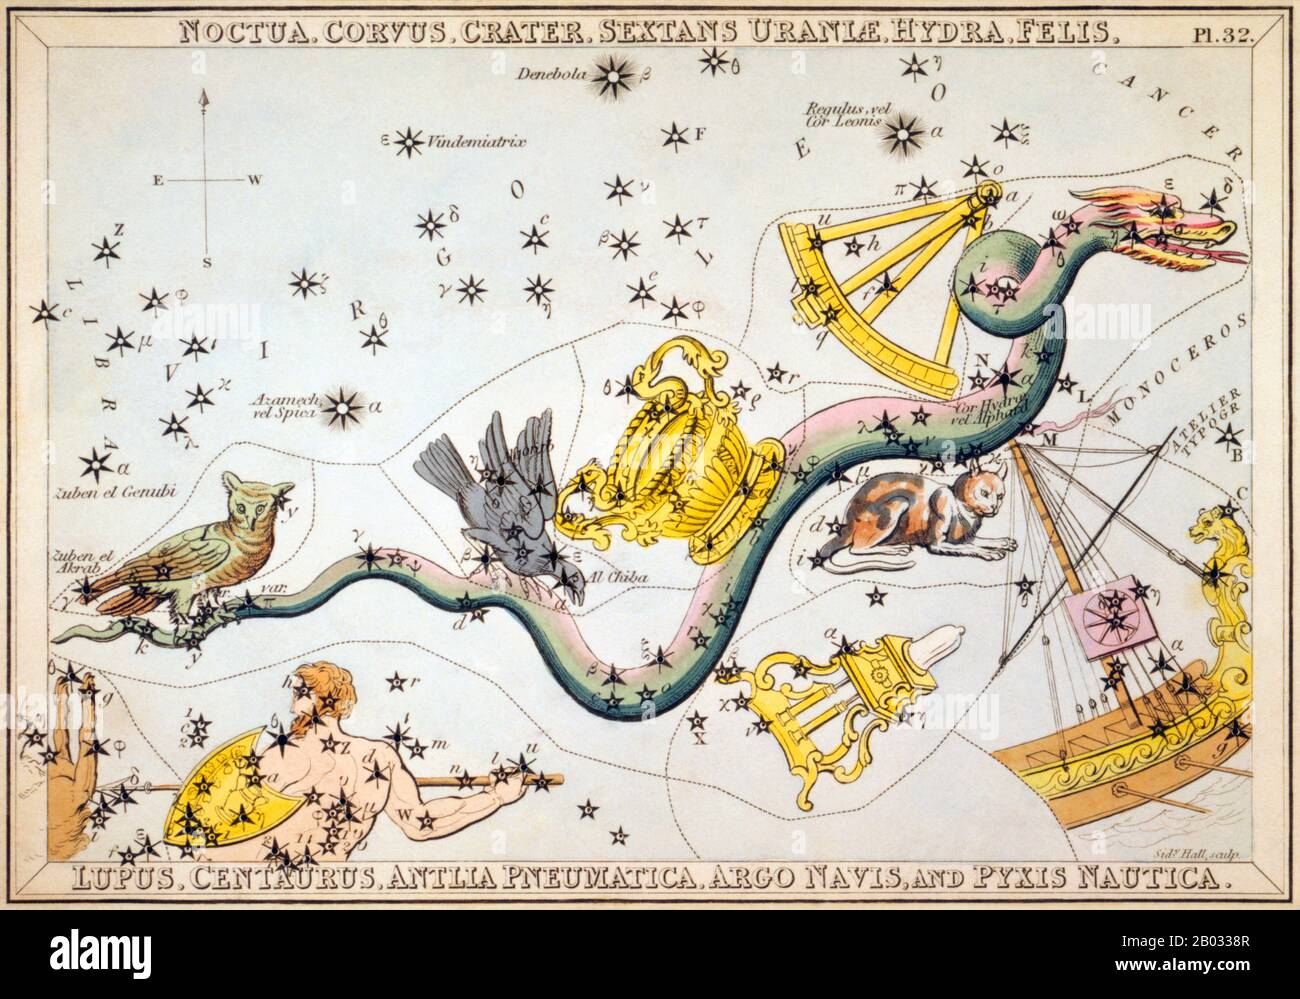 Urania's Mirror; or, a view of the Heavens is a set of 32 astronomical star chart cards, first published in November 1824. They had illustrations based on Alexander Jamieson's A Celestial Atlas, but the addition of holes punched in them allowed them to be held up to a light to see a depiction of the constellation's stars. They were engraved by Sidney Hall, and were said to be designed by 'a lady', but have since been identified as the work of the Reverend Richard Rouse Bloxam, an assistant master at Rugby School.  The cover of the box-set showed a depiction of Urania, the muse of astronomy, an Stock Photo